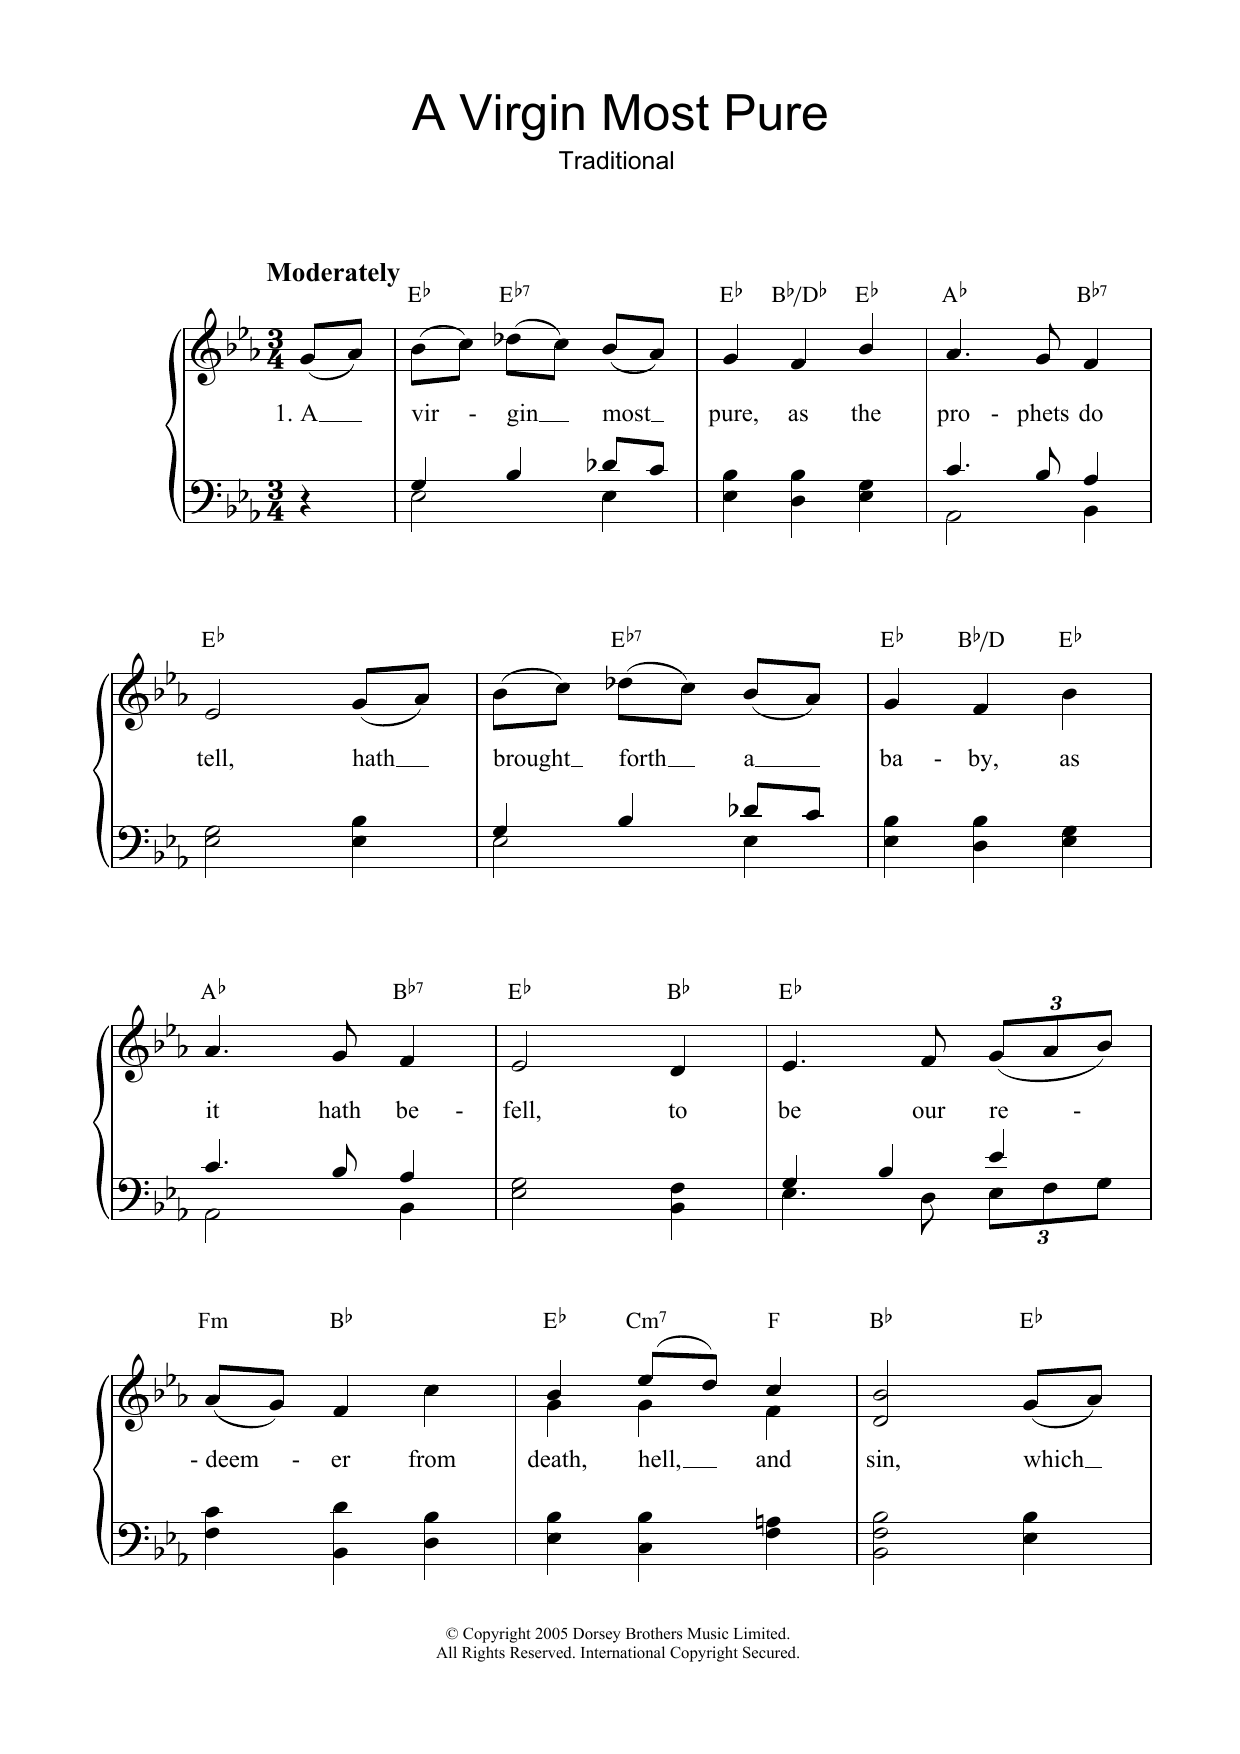 Download Traditional A Virgin Most Pure Sheet Music